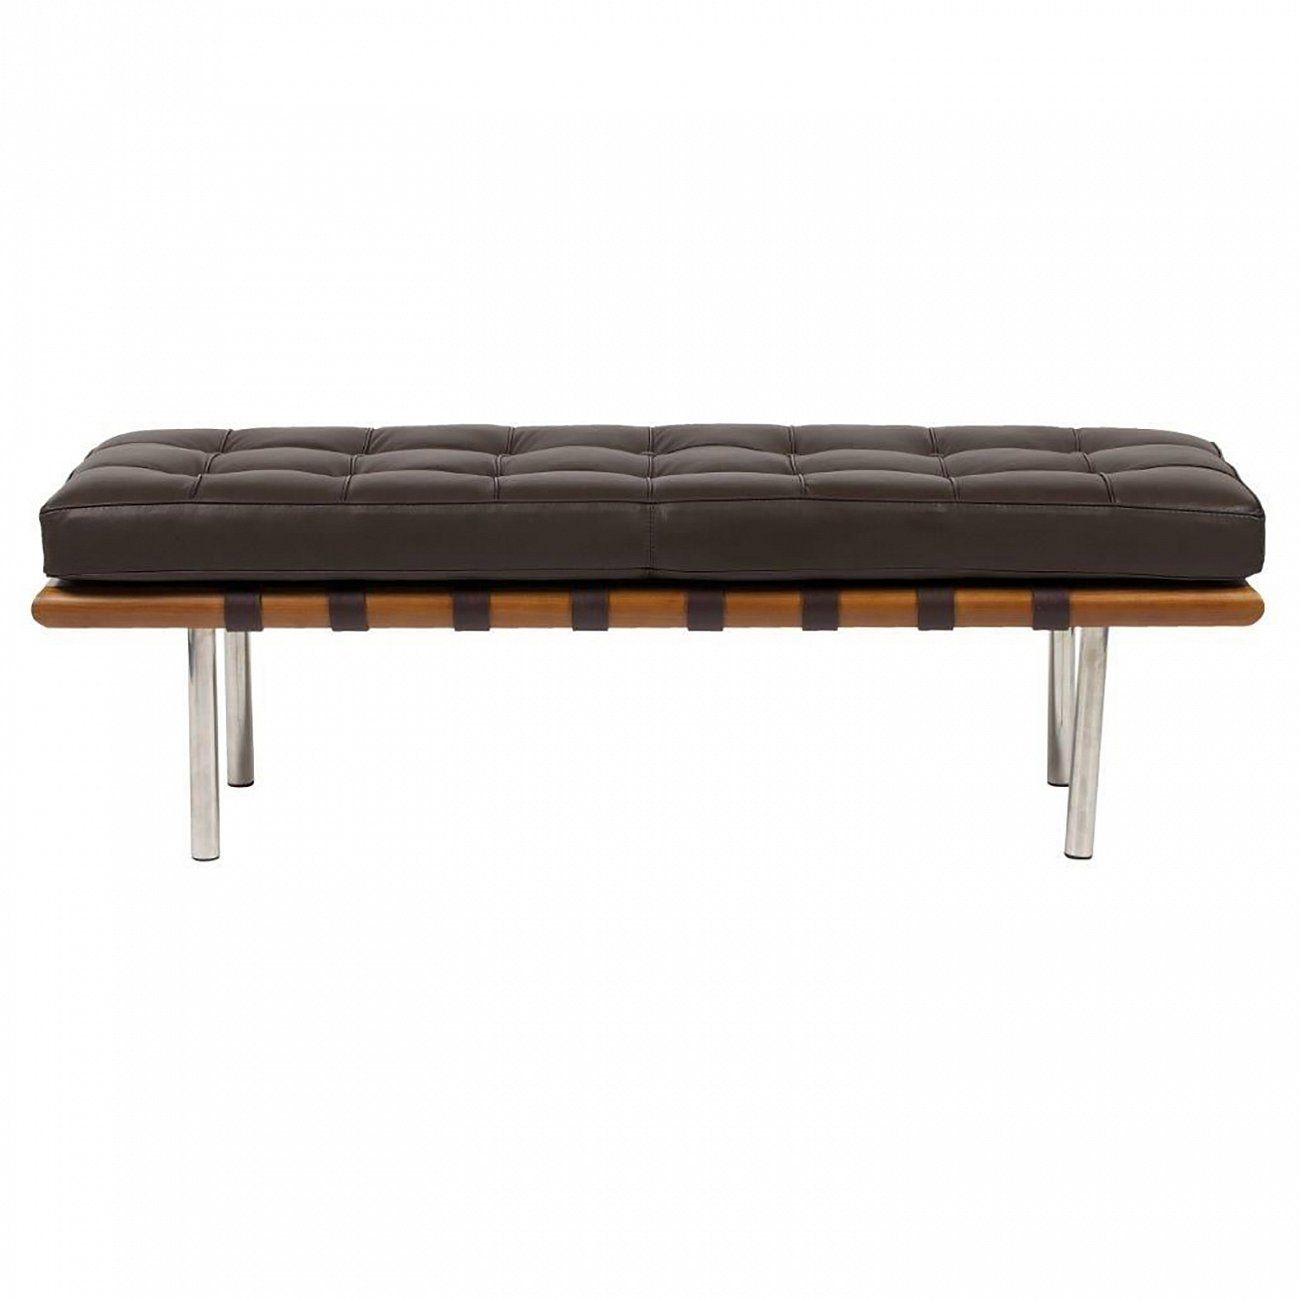 Barcelona brown couch